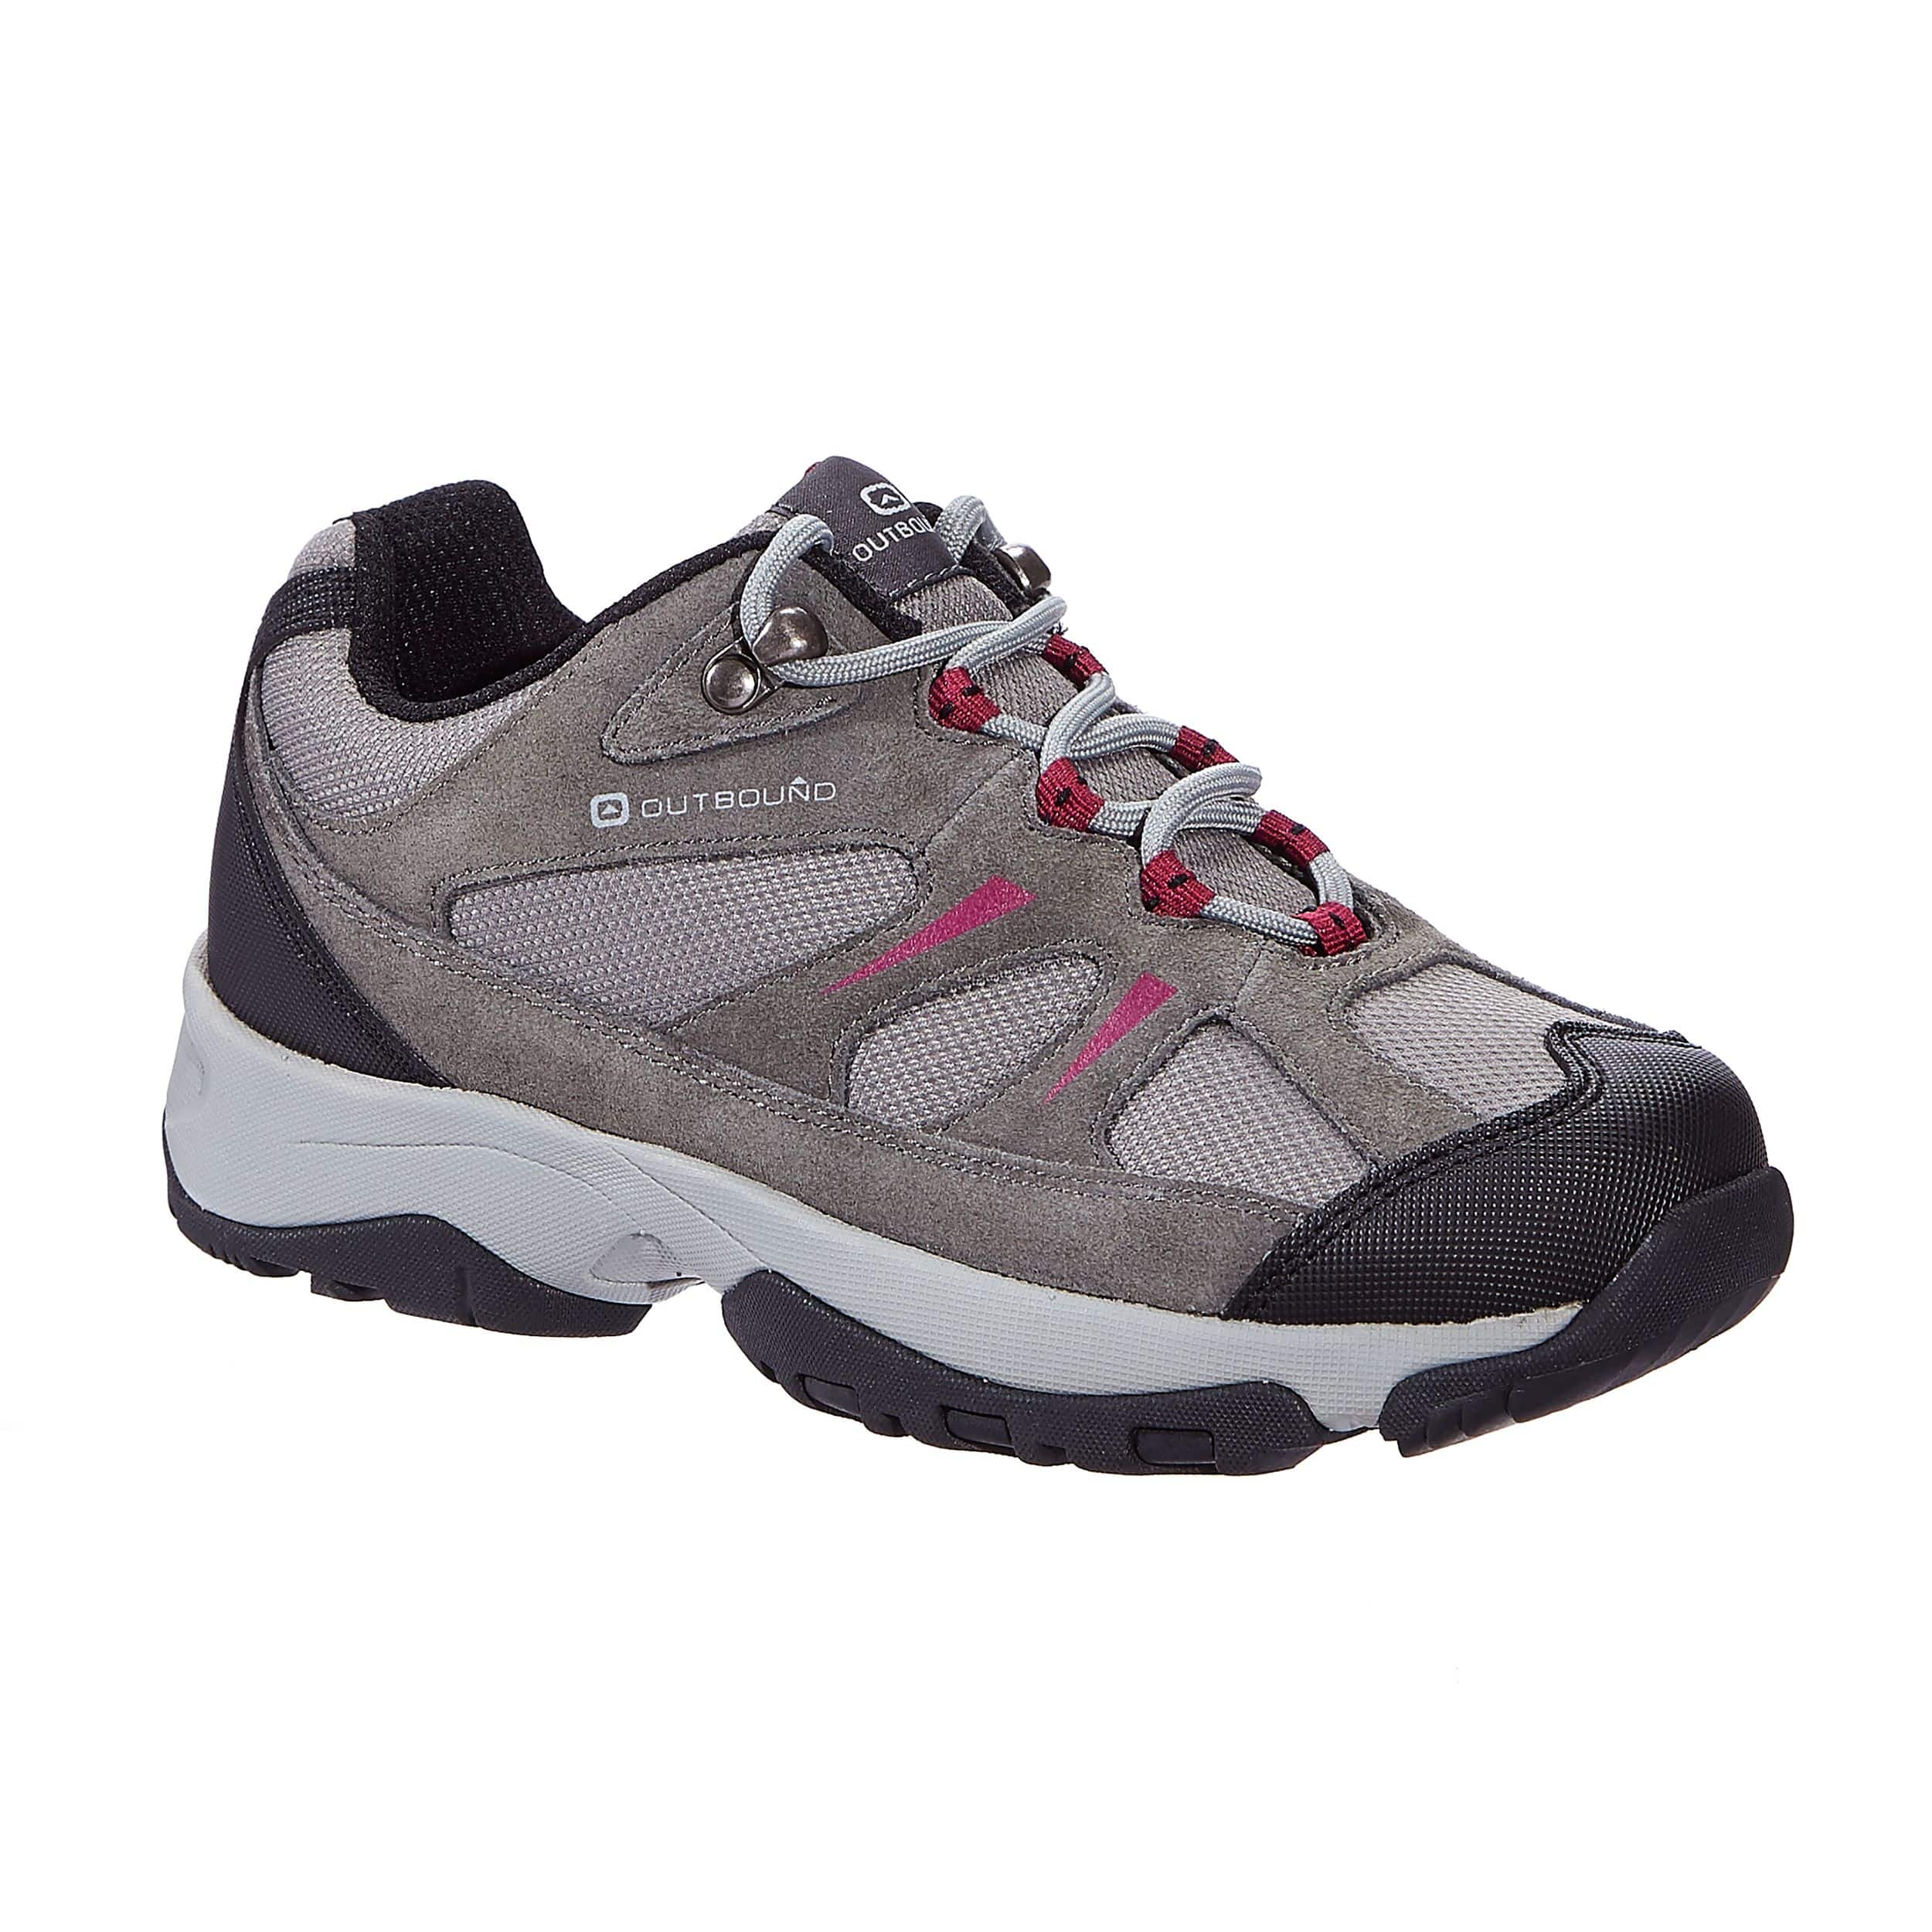 Outbound Women's Trail Low-Cut Water-Resistant Hiking Boots, Charcoal